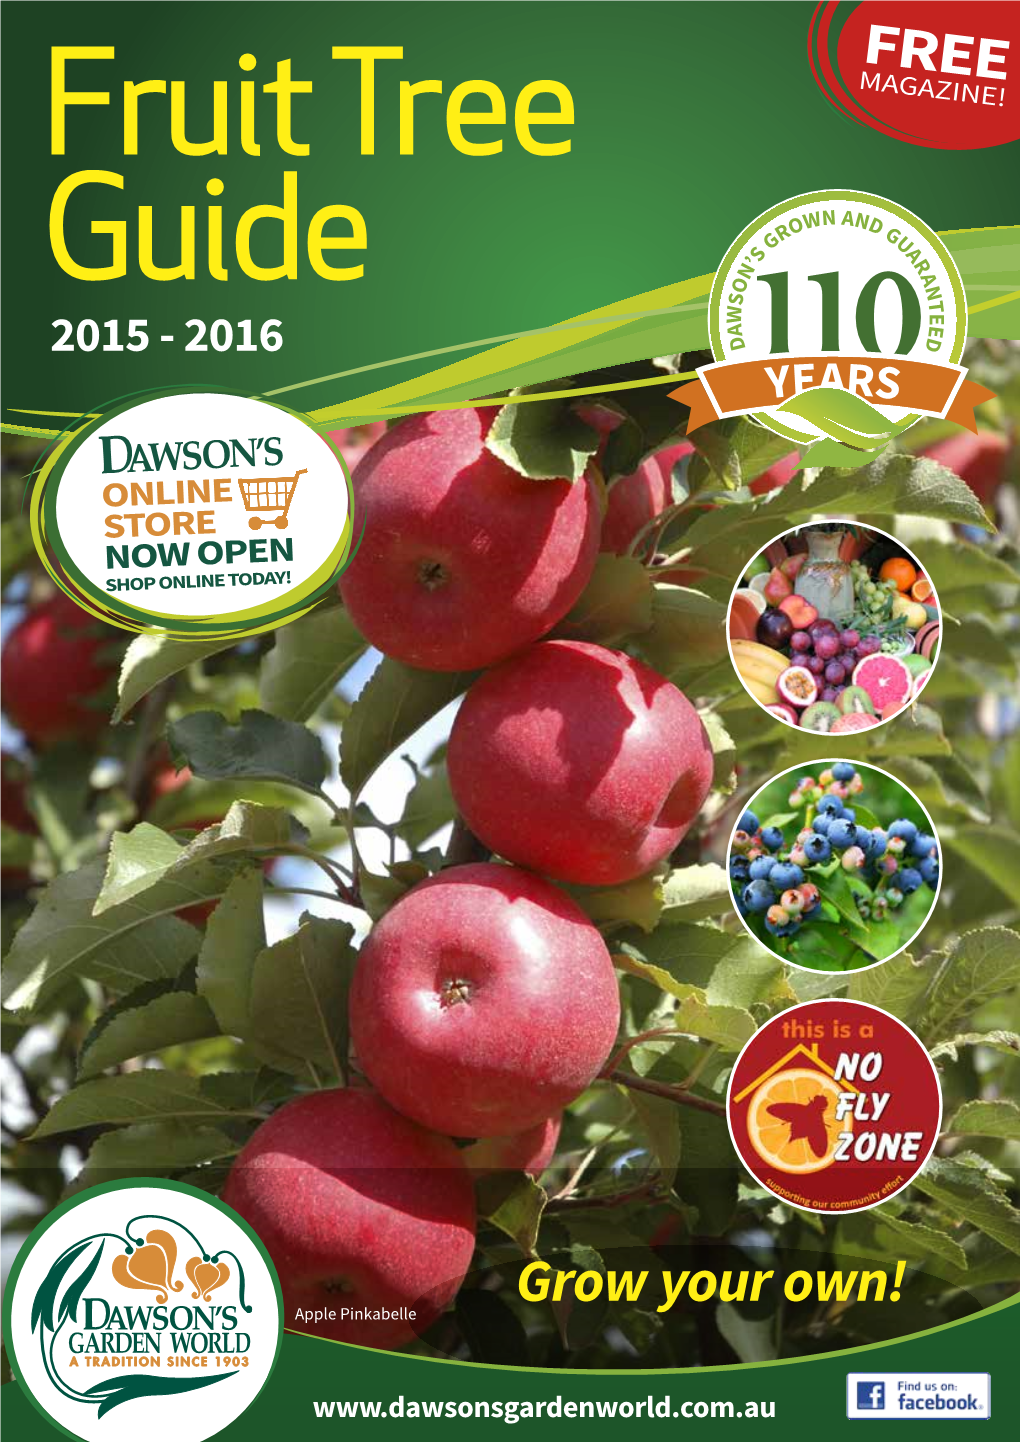 Fruit Tree Guide 2015-16 Proof of Purchase